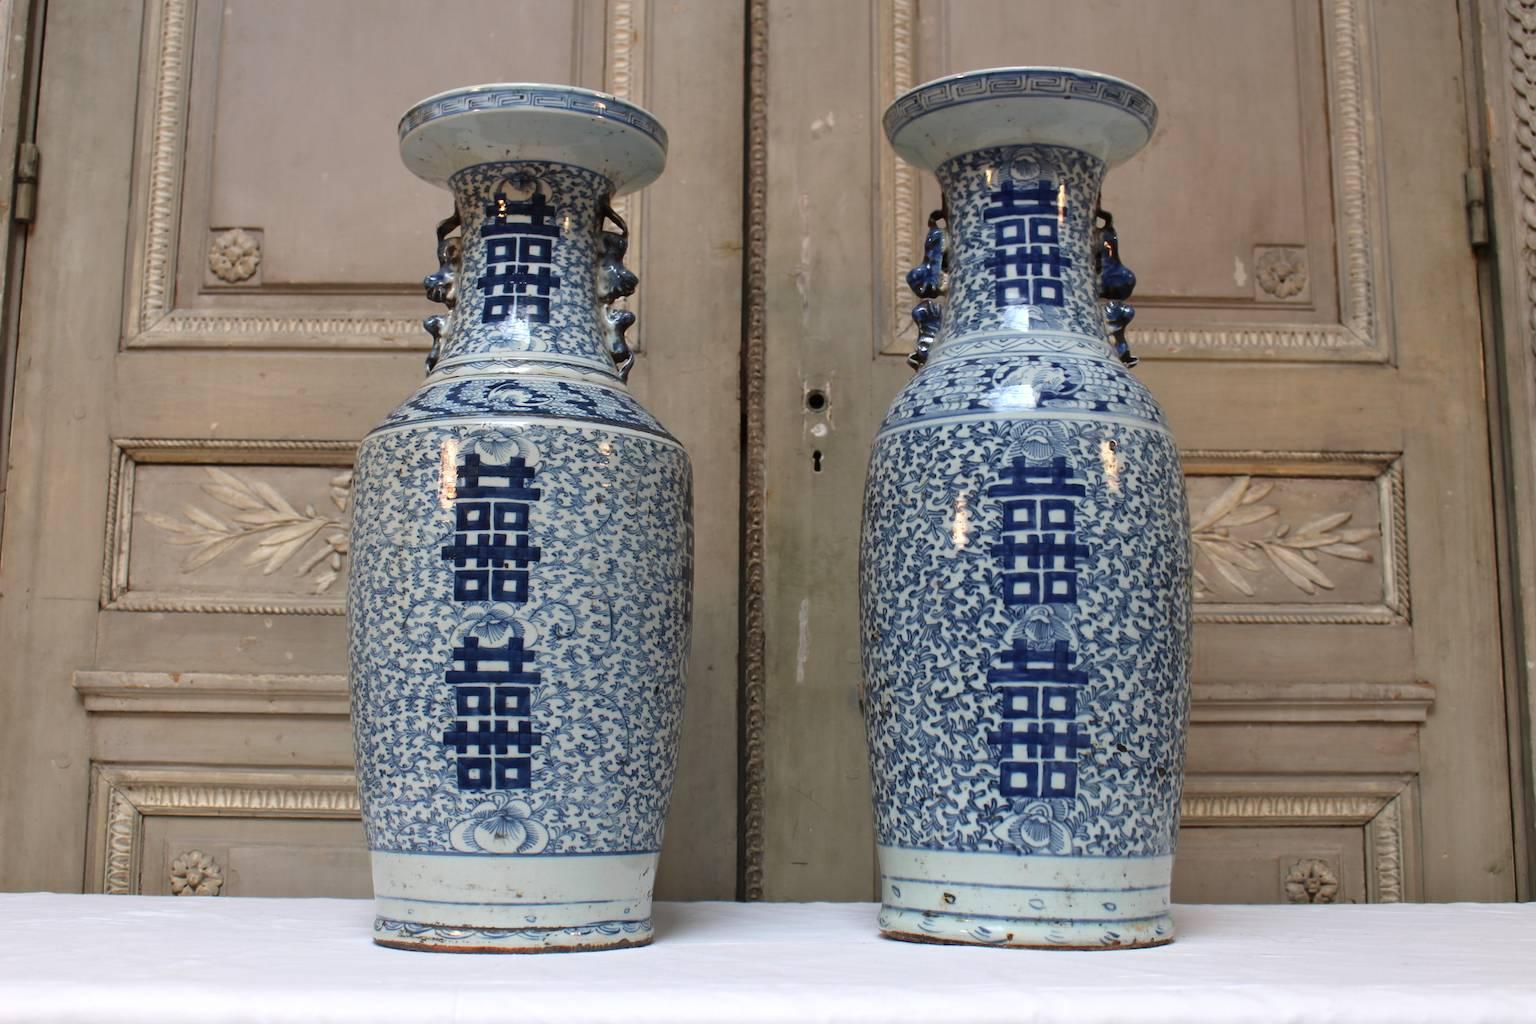 A matched pair of Chinese porcelain blue and white double happiness vases,
late 19th century.